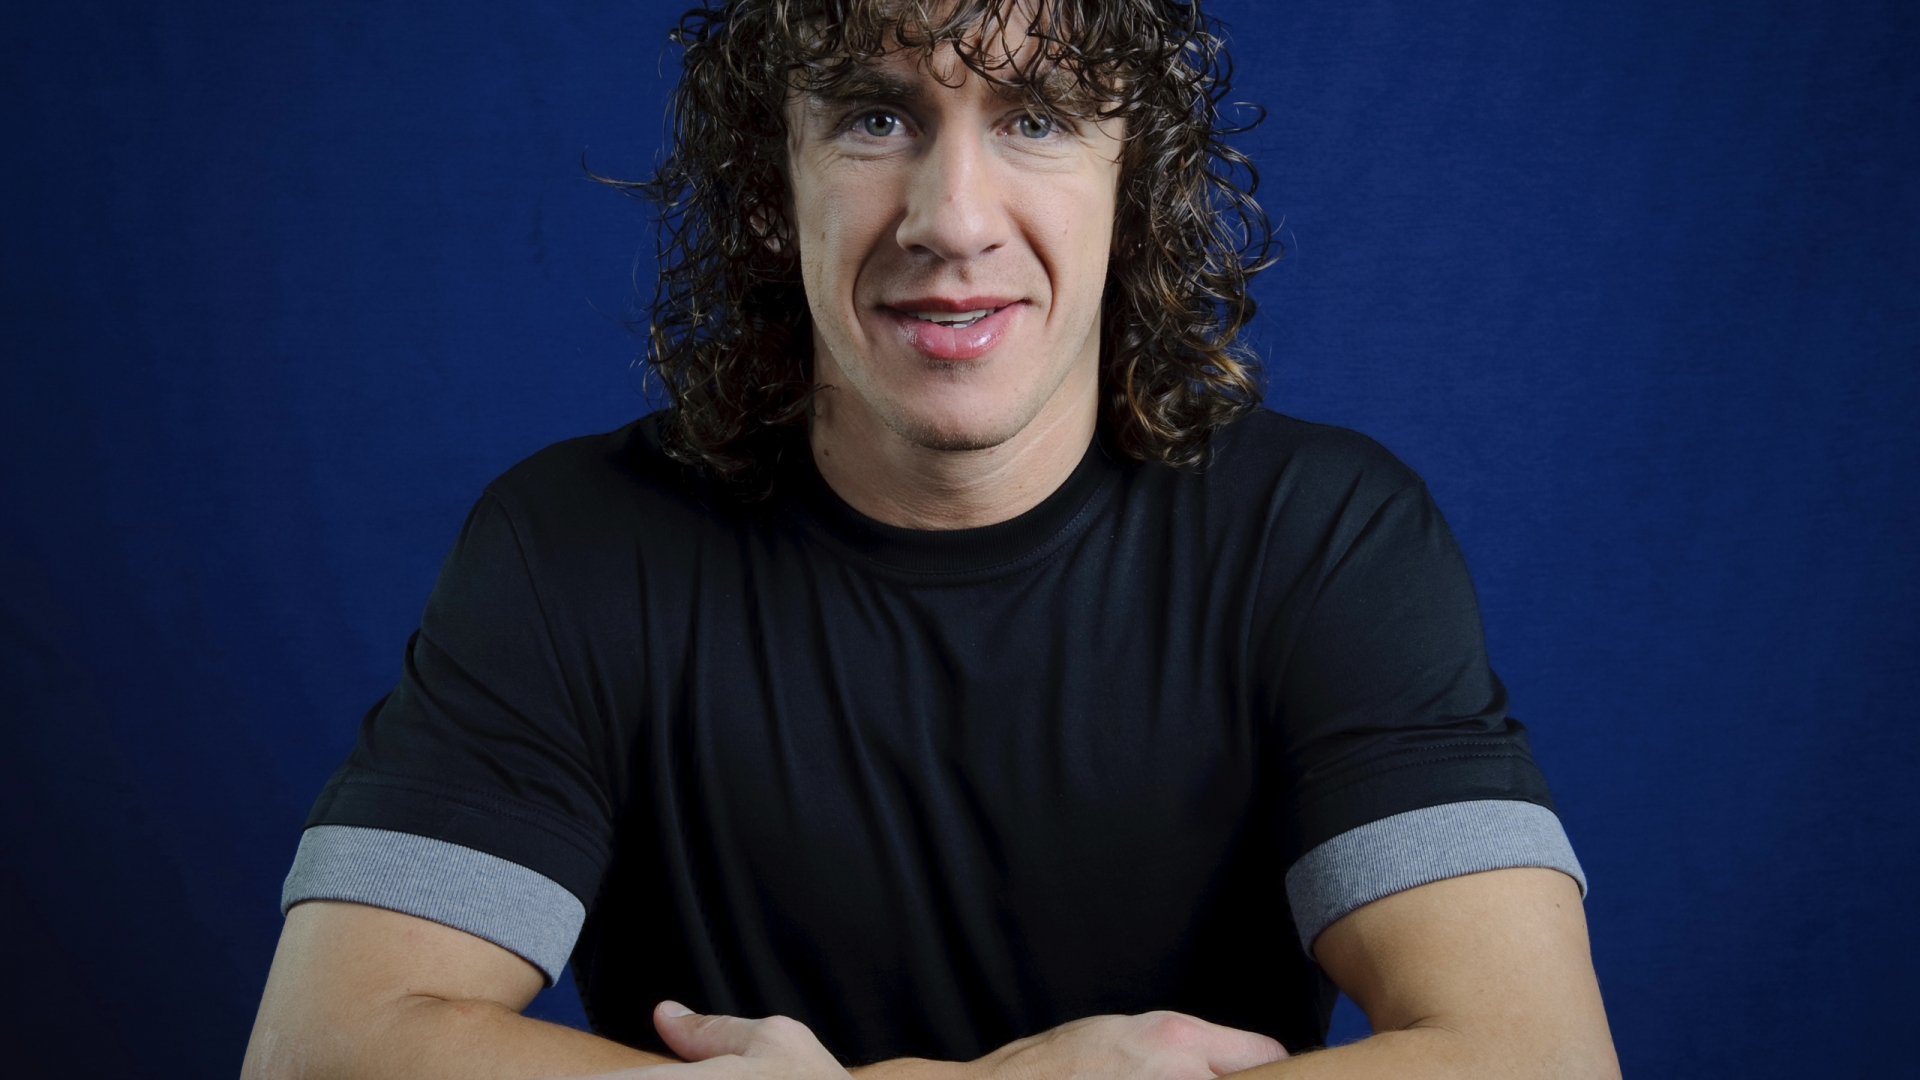 Carles Puyol Smile for 1920 x 1080 HDTV 1080p resolution